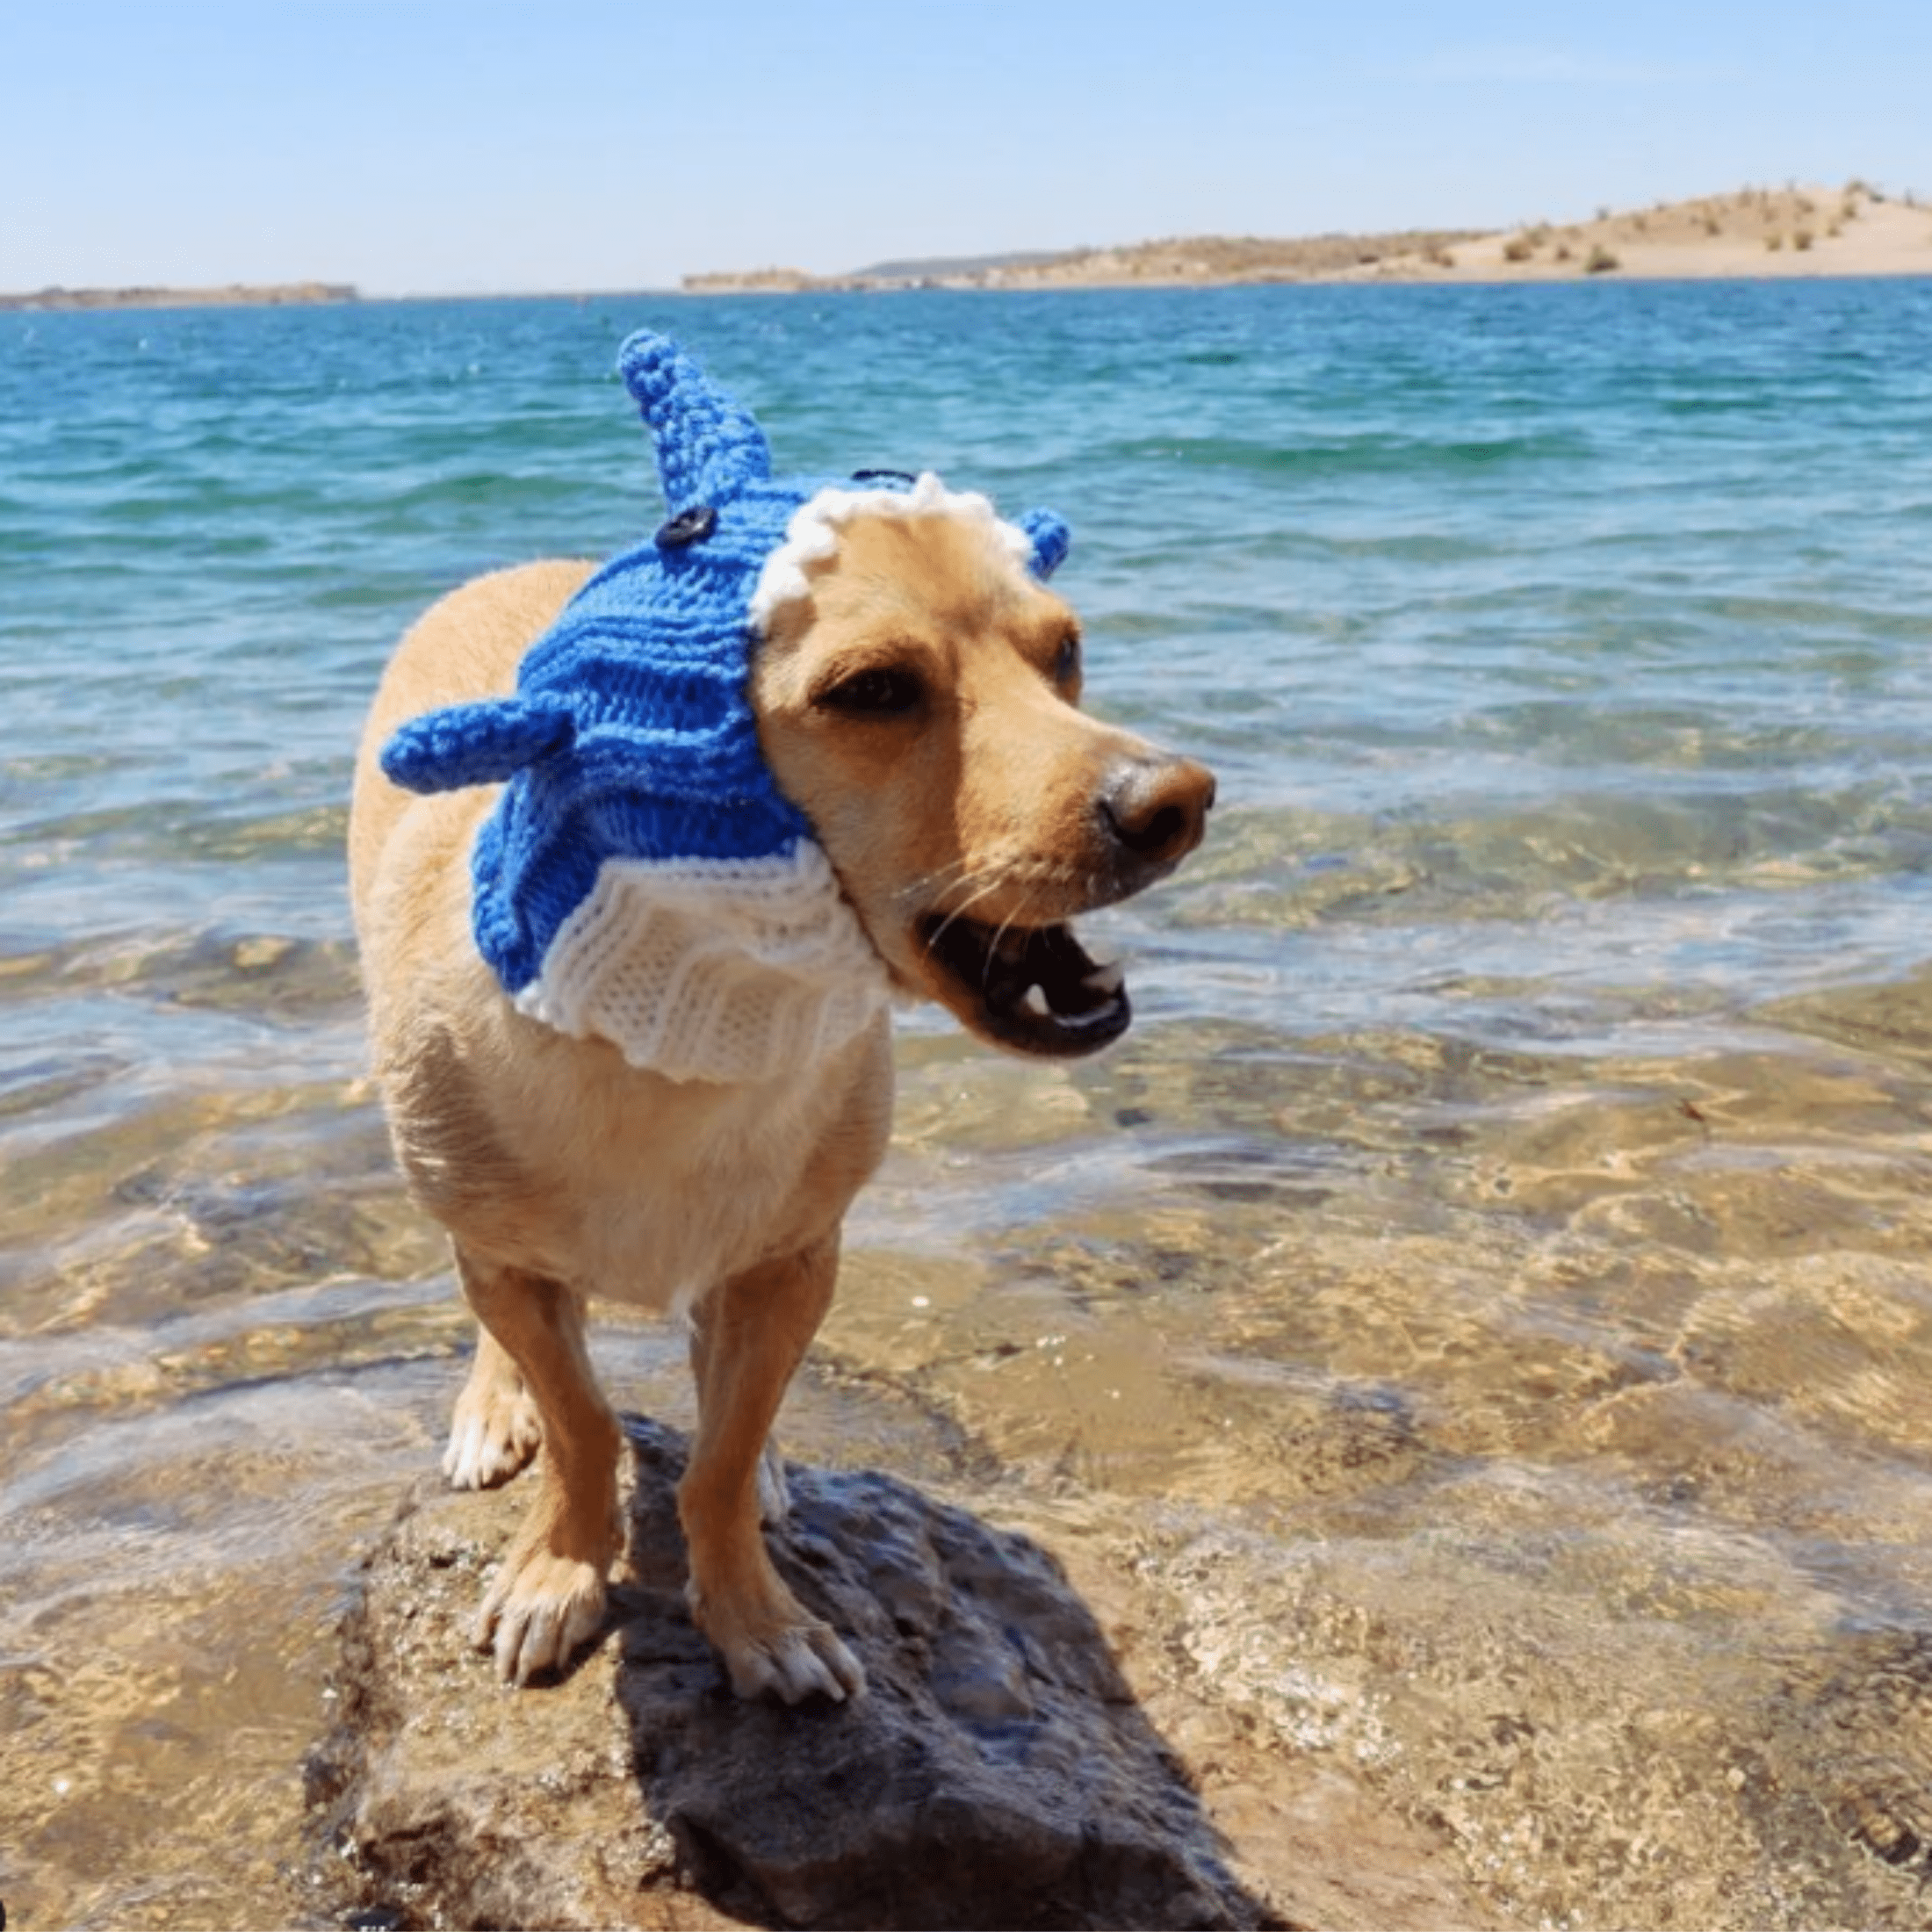 Zoo Snoods Handmade Blue Shark Dog Costume with Ear Headband and Neck Outfit